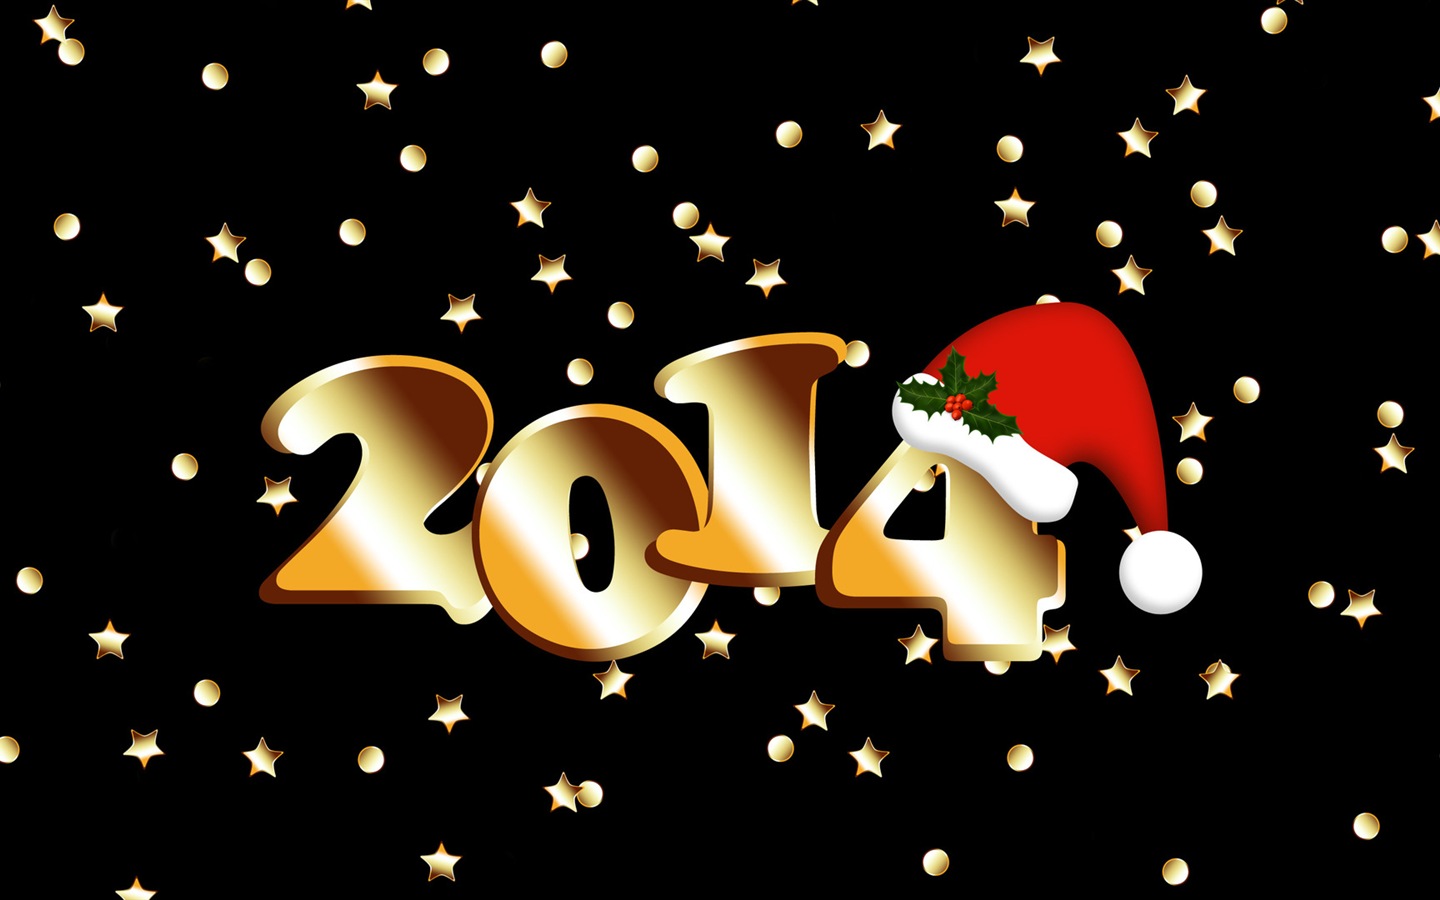 2014 New Year Theme HD Wallpapers (1) #15 - 1440x900